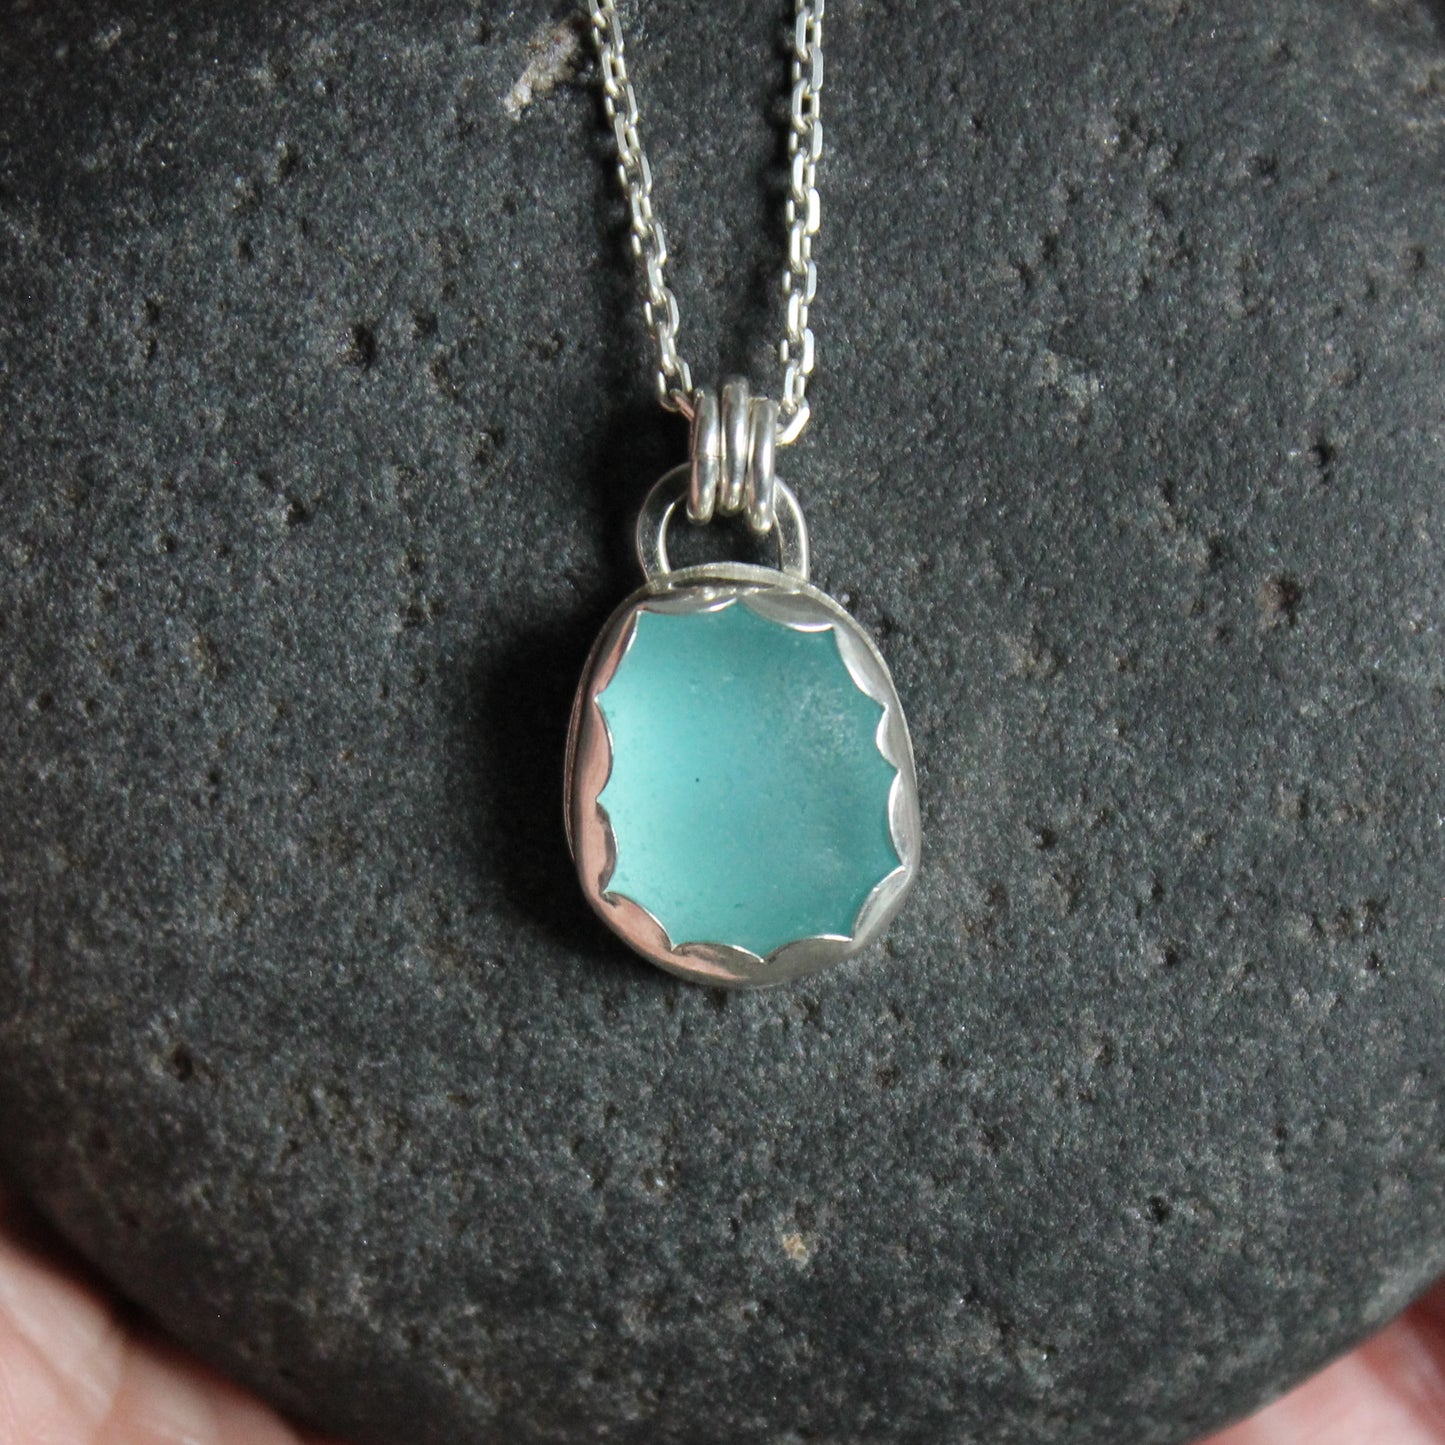 A small piece of aqua blue sea glass set in a fine and sterling silver scalloped bezel setting on a sterling silver chain. 